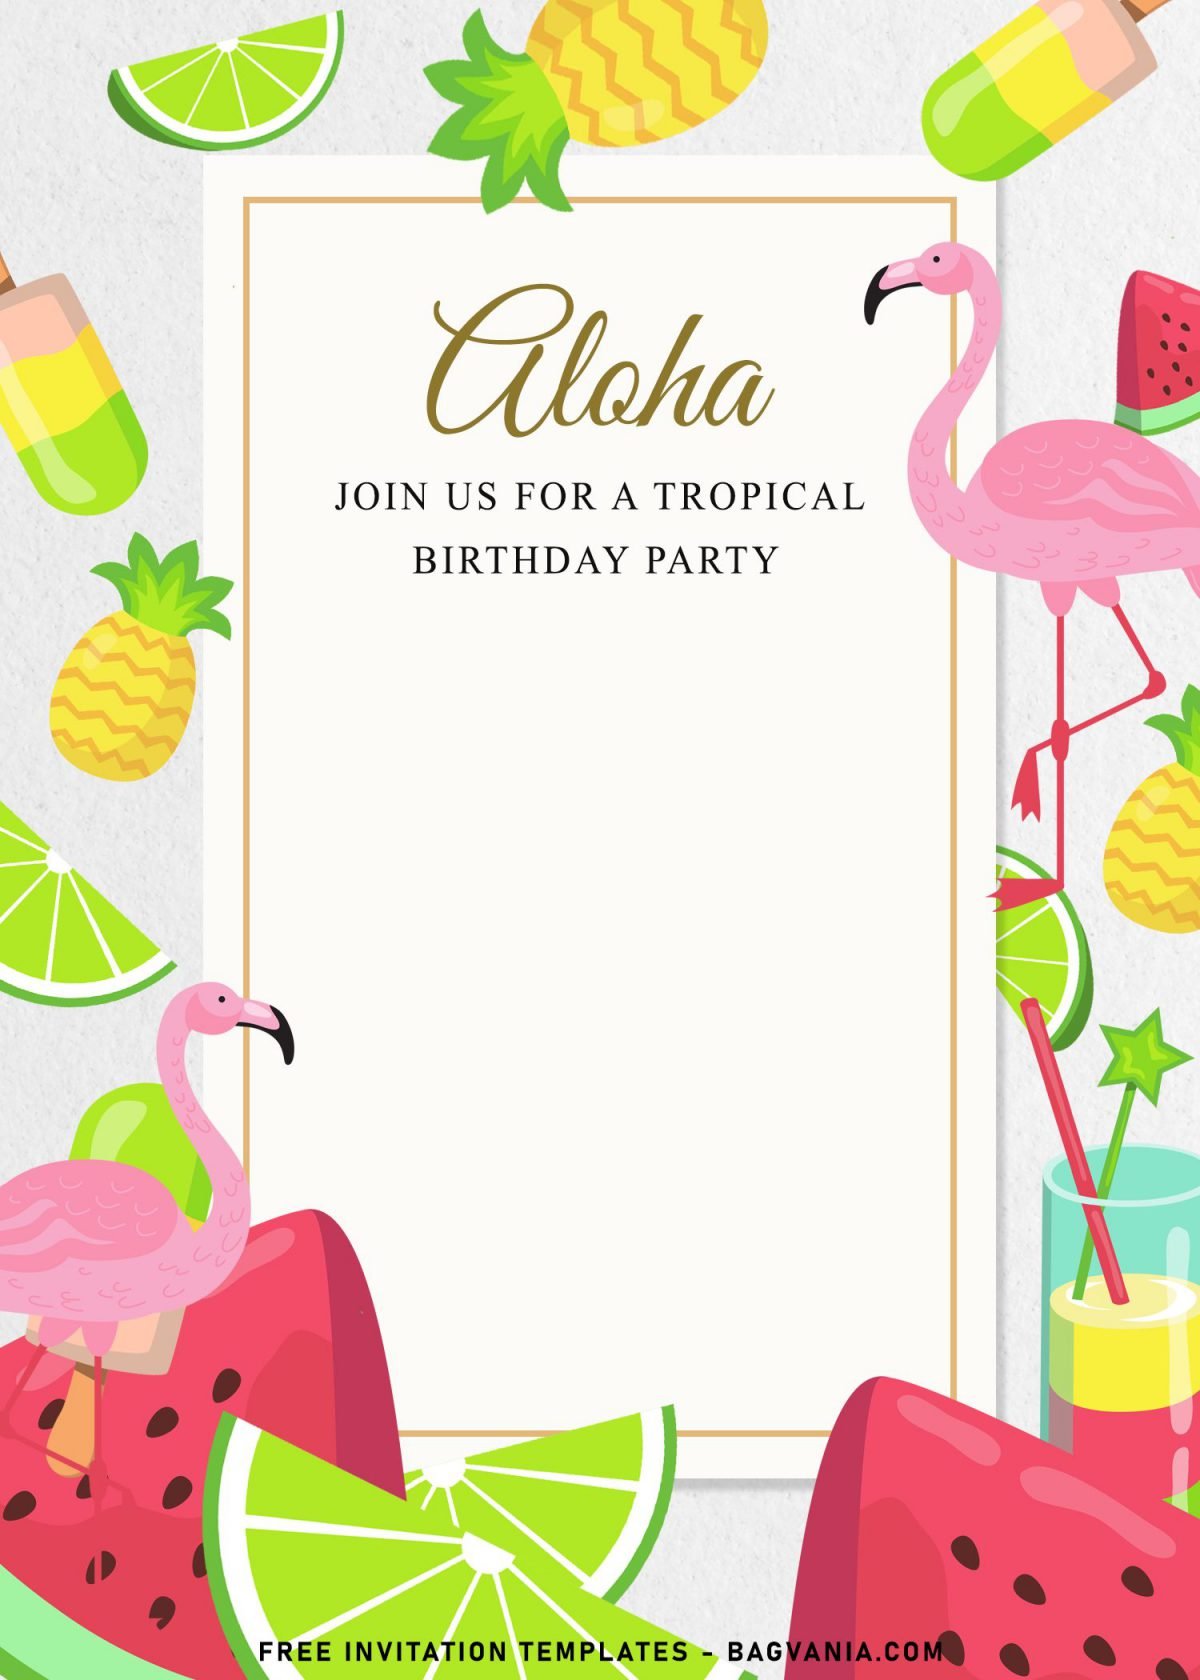 7+ Best Tropical Birthday Invitation Templates To Celebrate Your Kid's Birthday In Summer and has 